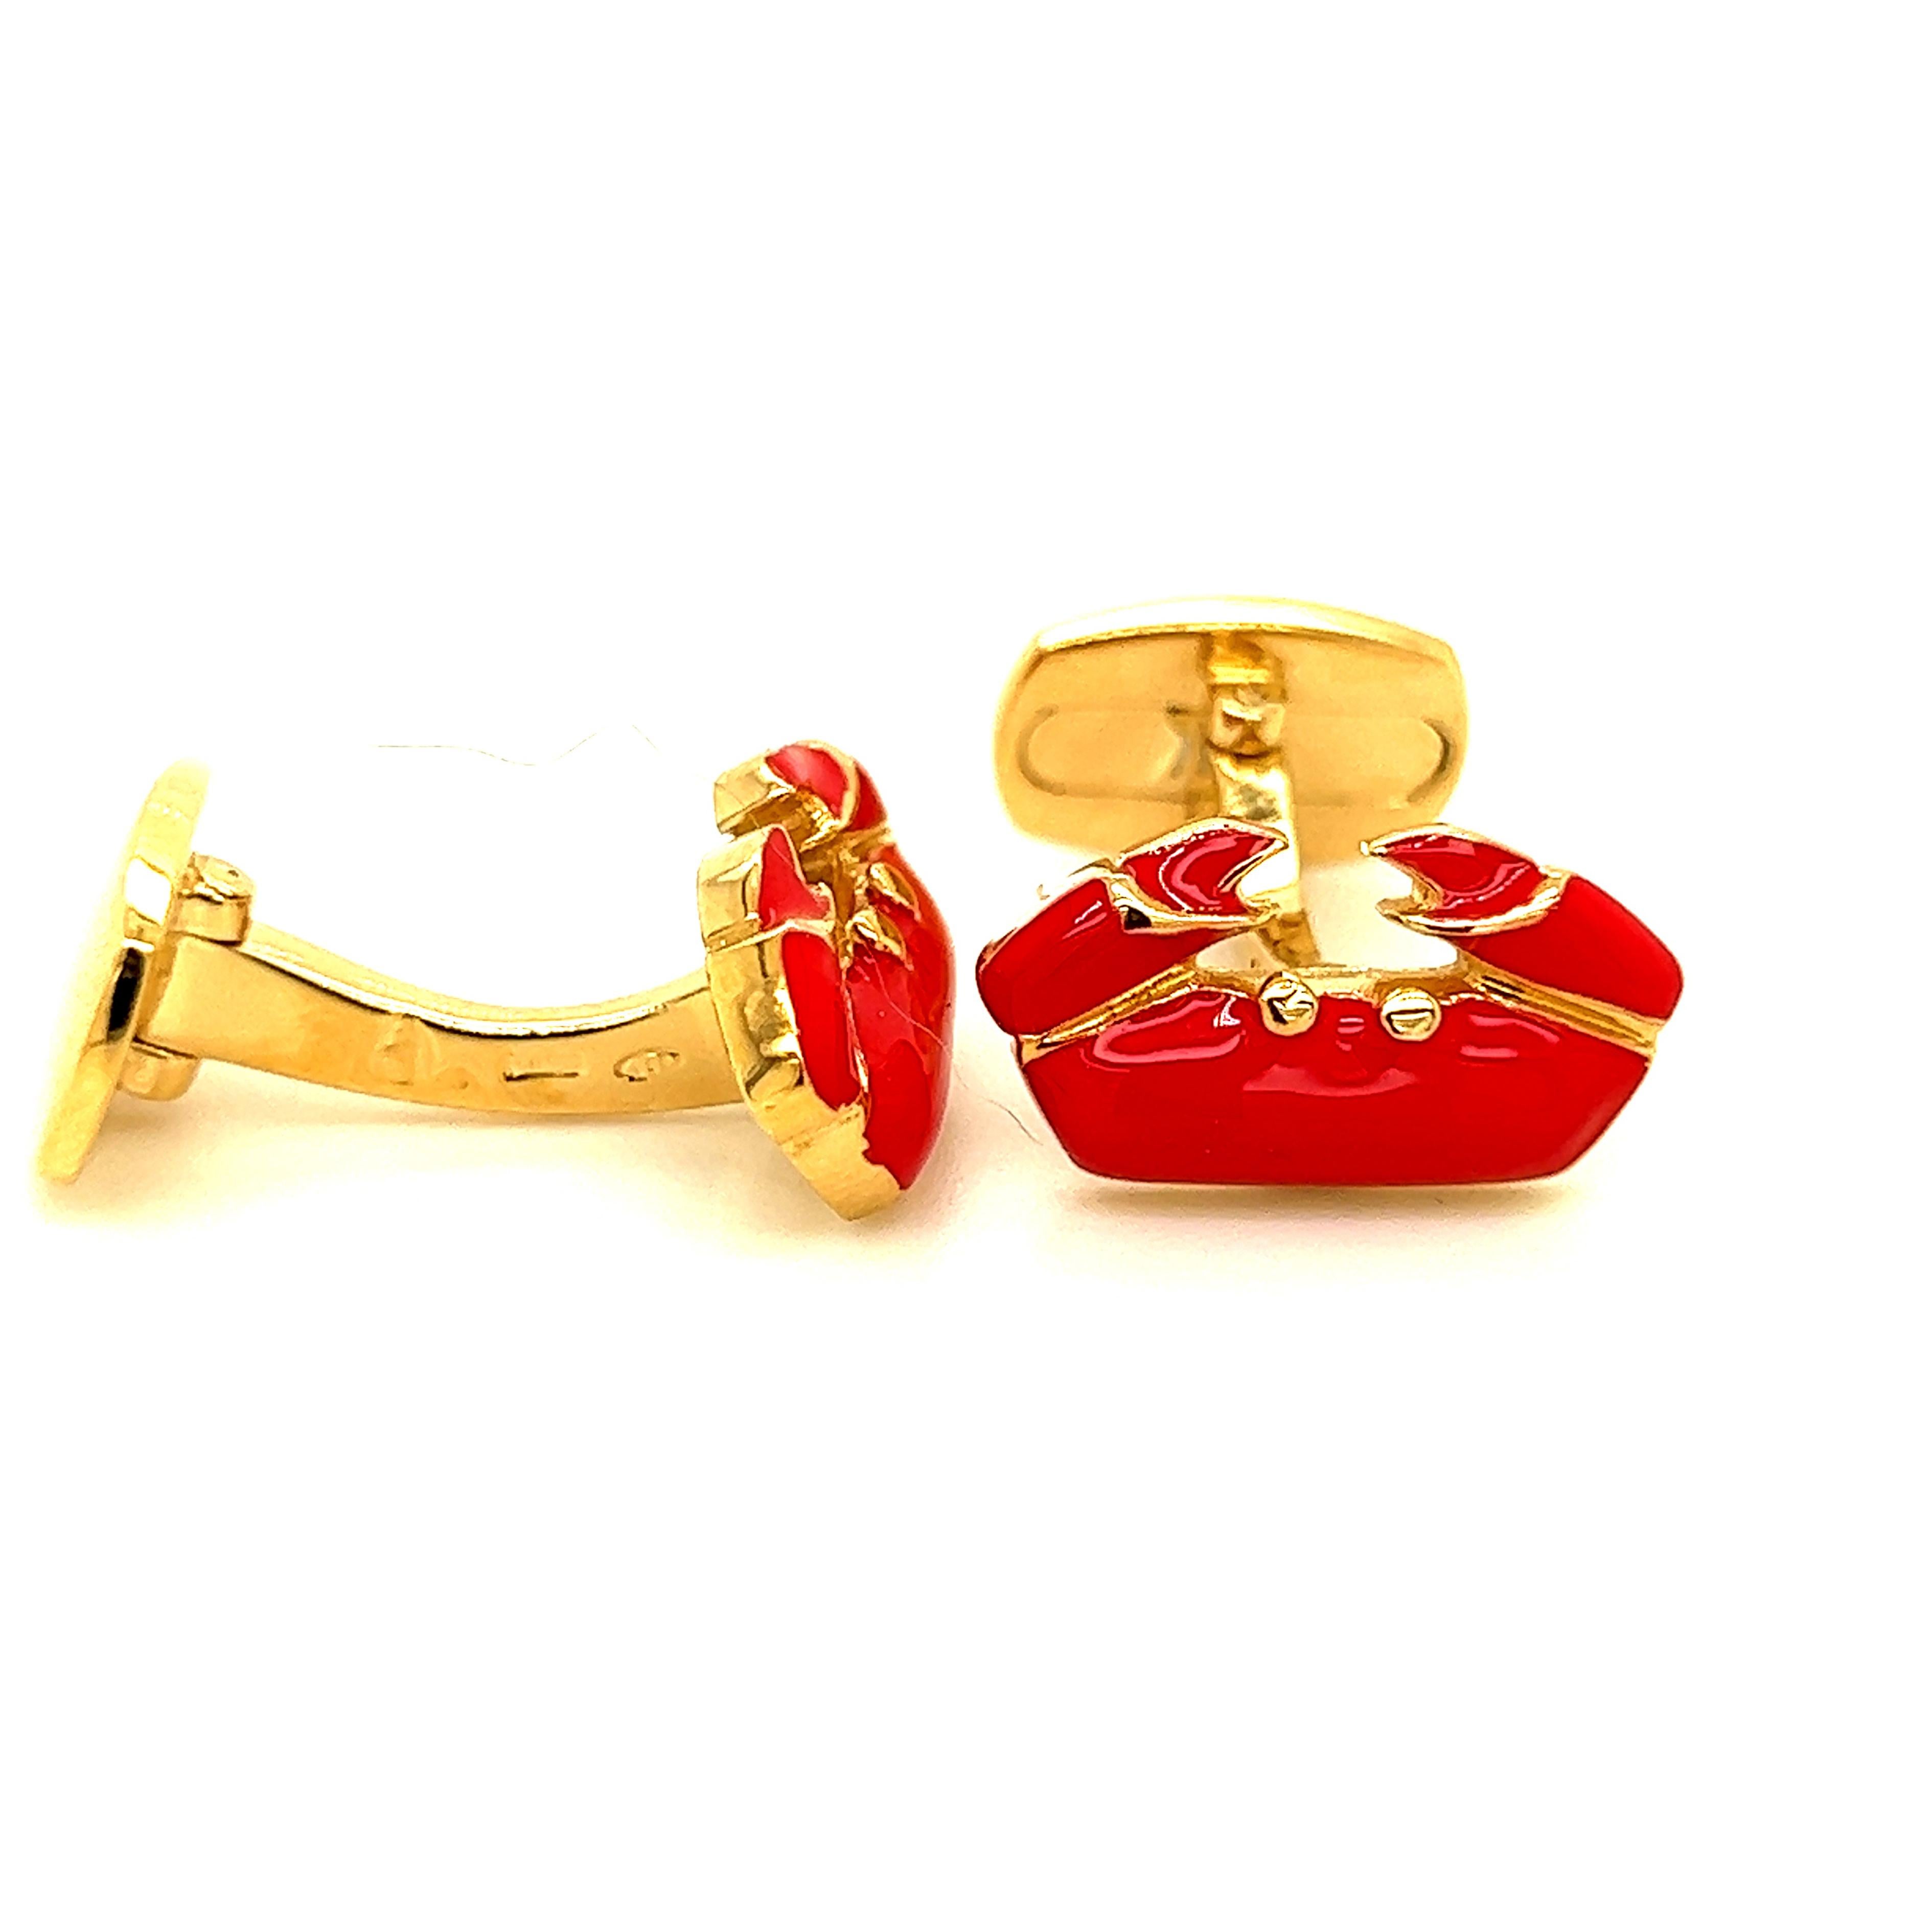 Unique and Chic Red Hand Enamelled Little Crab Shaped,  Cancer Zodiac Sign, T-Bar Back, Sterling Silver Gold-Plated Cufflinks.
In our smart tobacco suede leather case and pouch.

